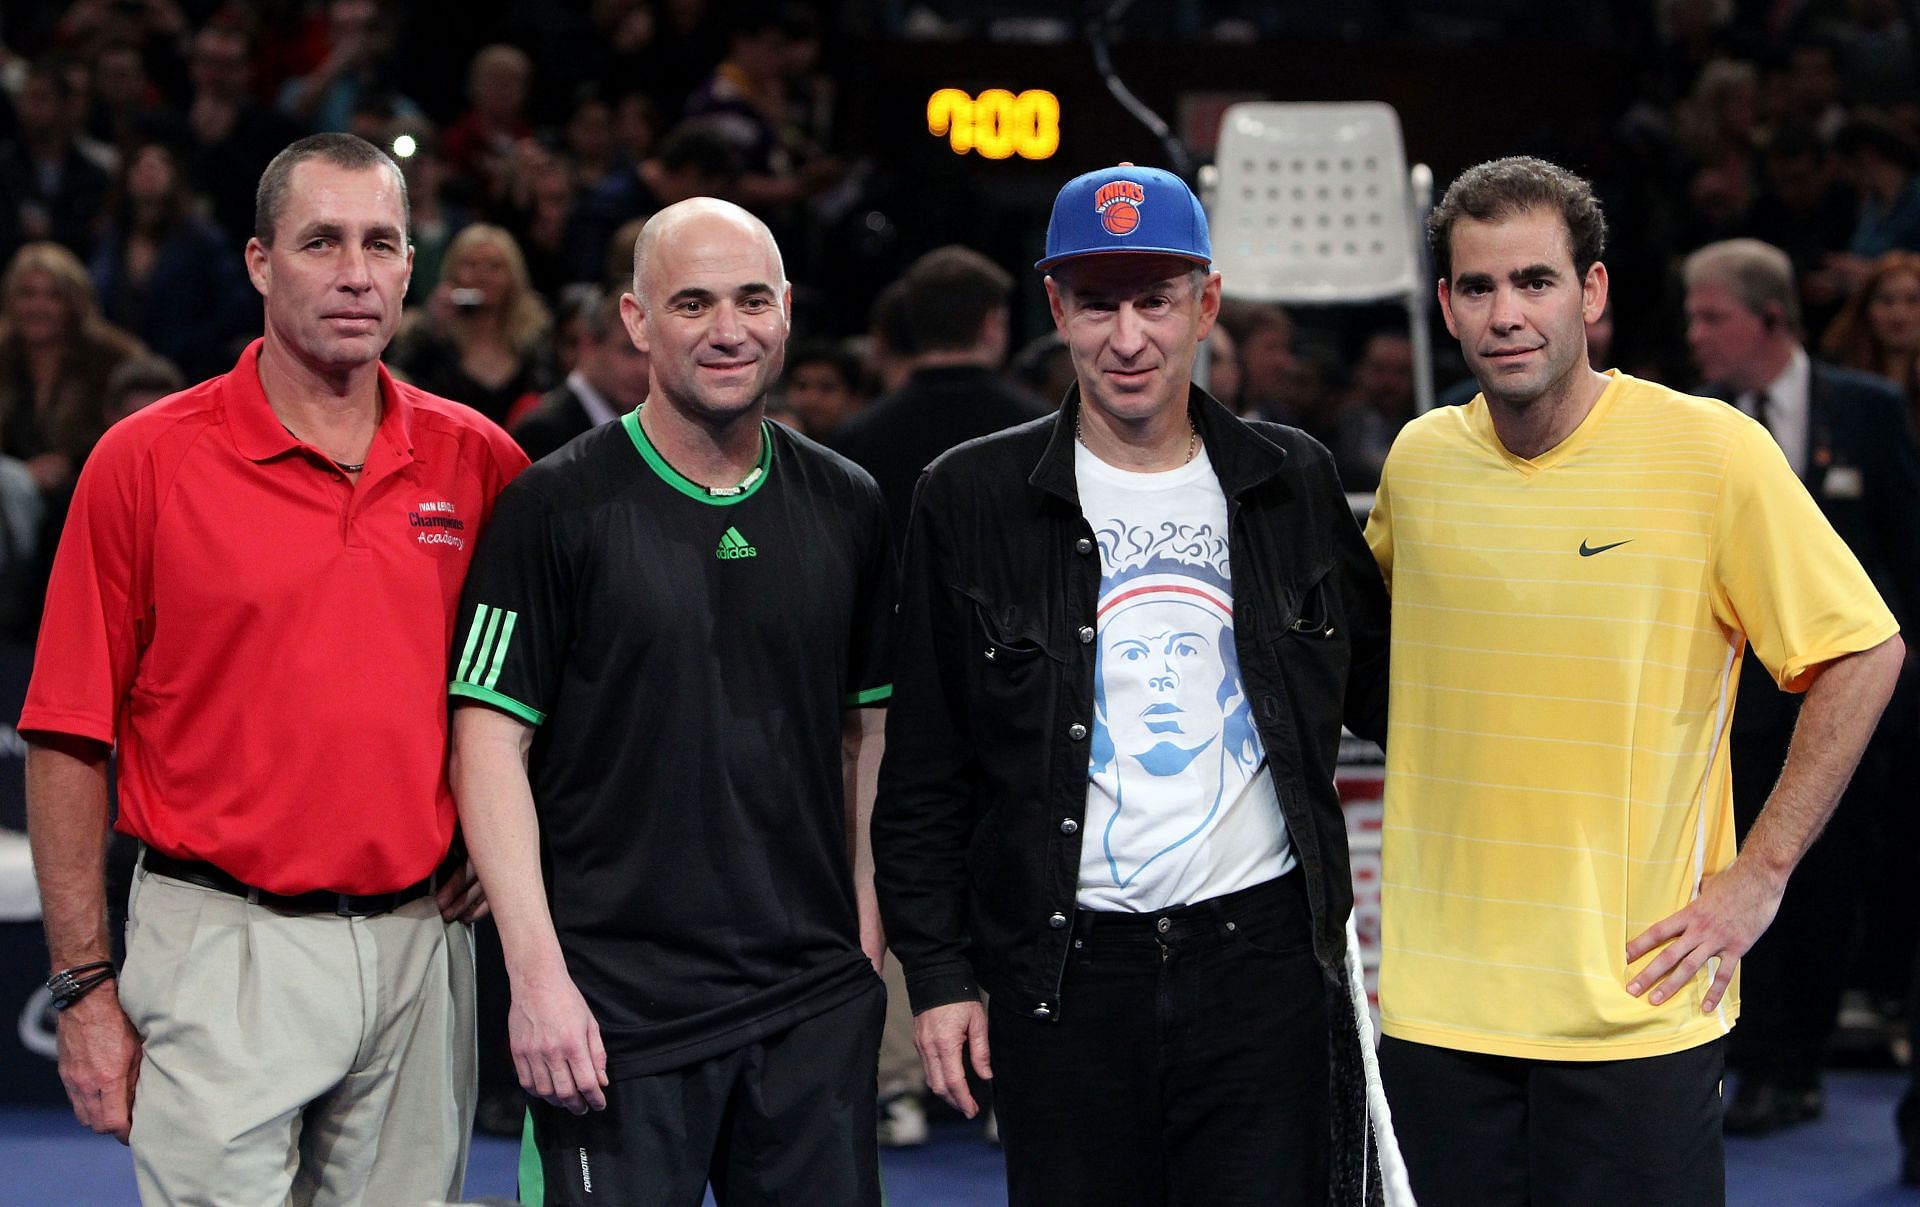 Agassi (second from left) and Pete Sampras (extreme right) alongside Ivan Lendl and John McEnroe at the 2011 BNP Paribas Showdown